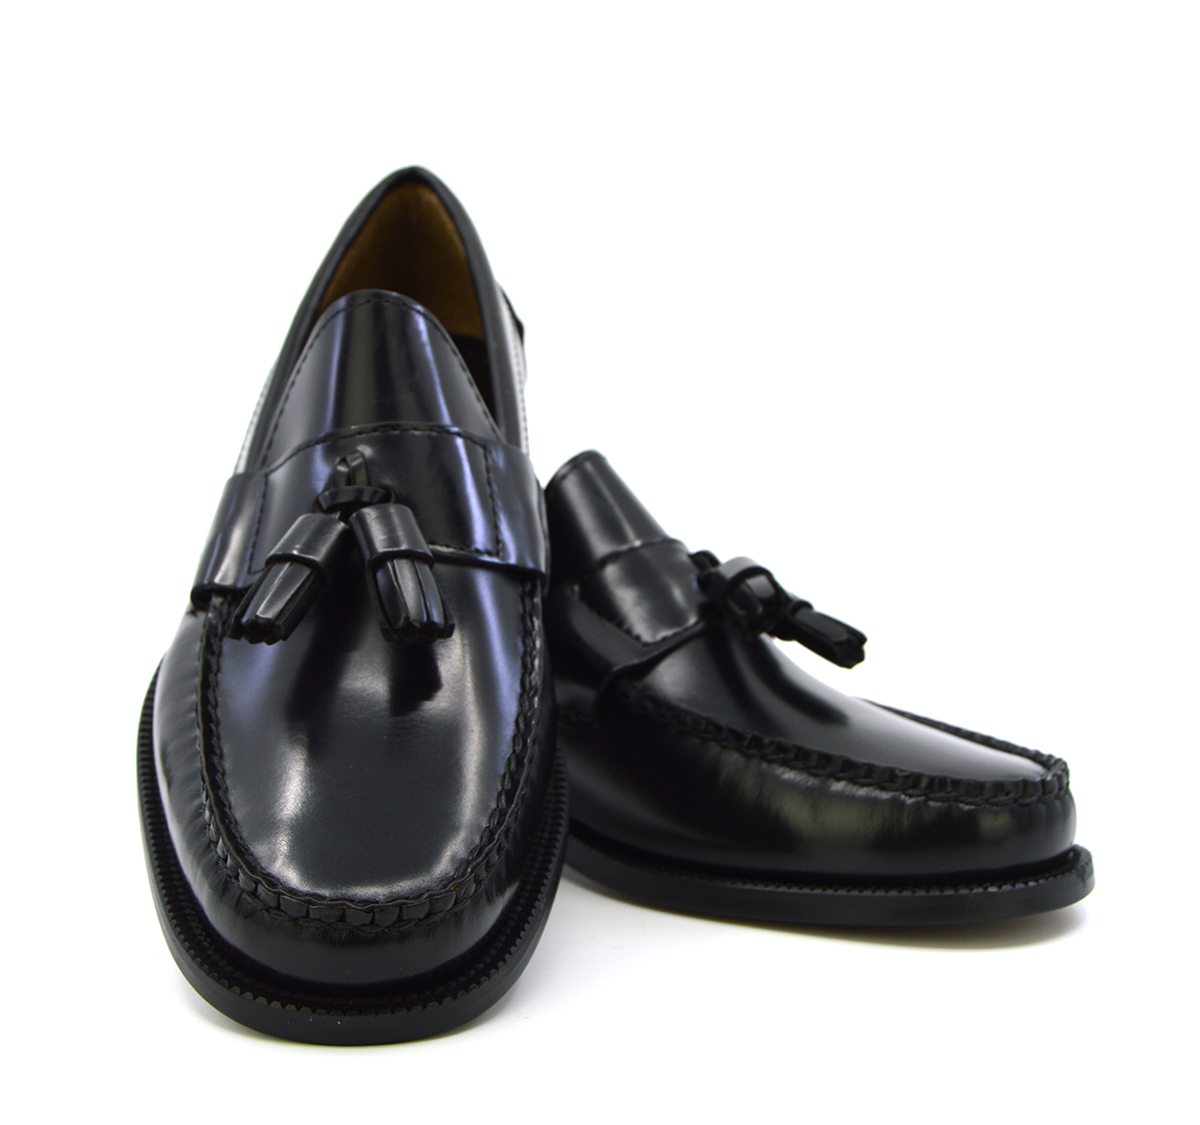 Tassel Loafers in Black – The Baron – Mod Shoes